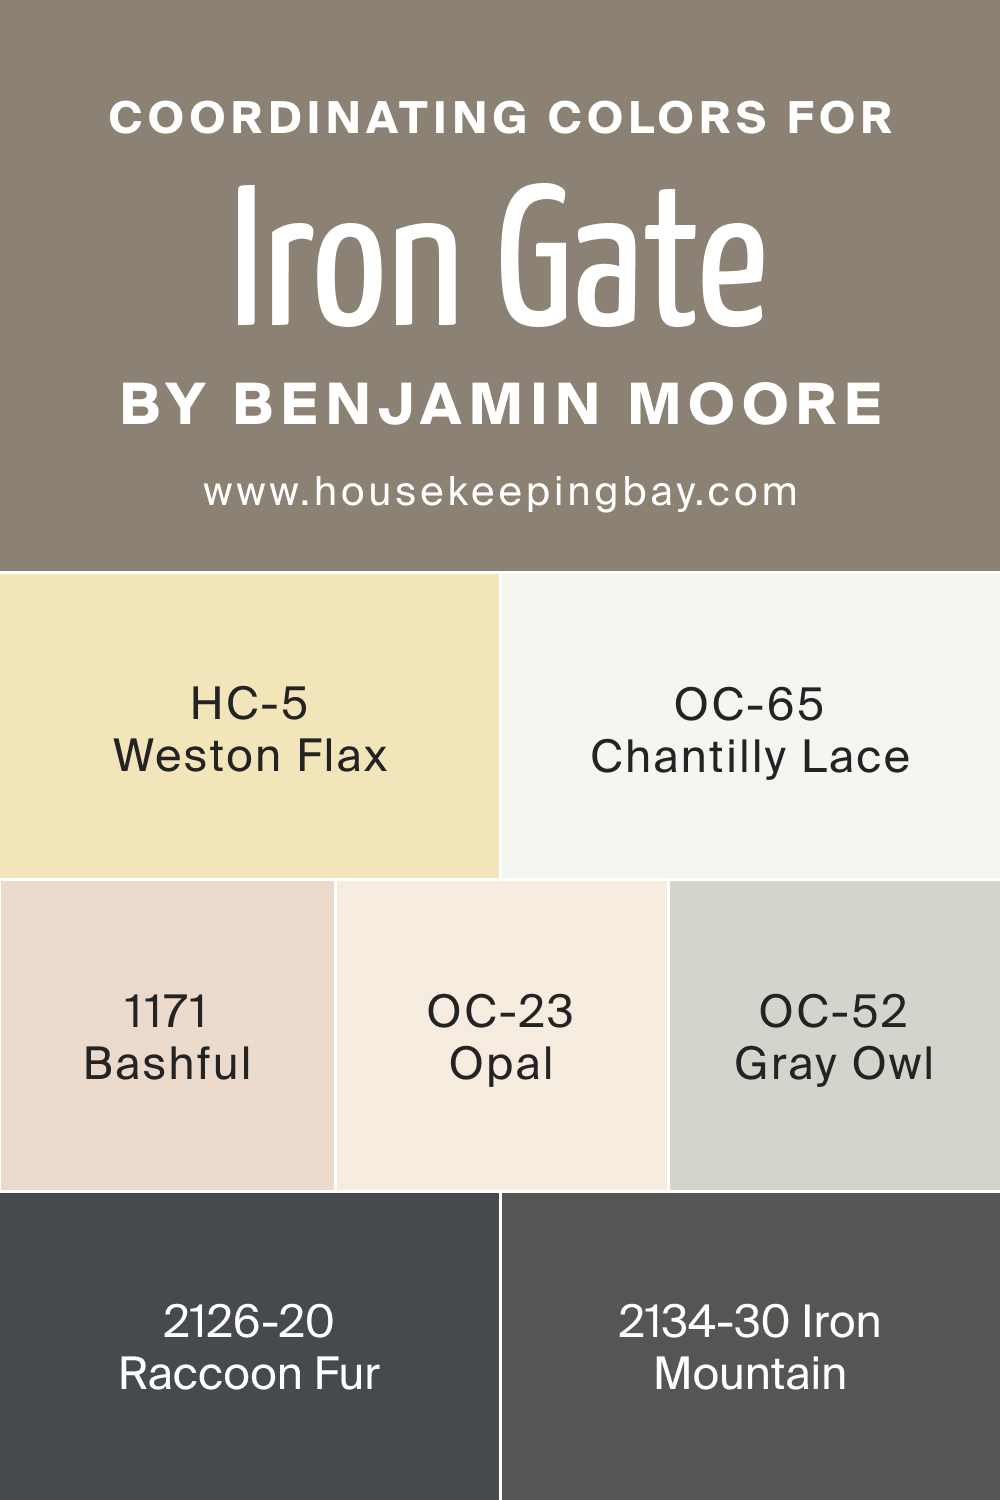 Coordinating Colors of BM Iron Gate 1545